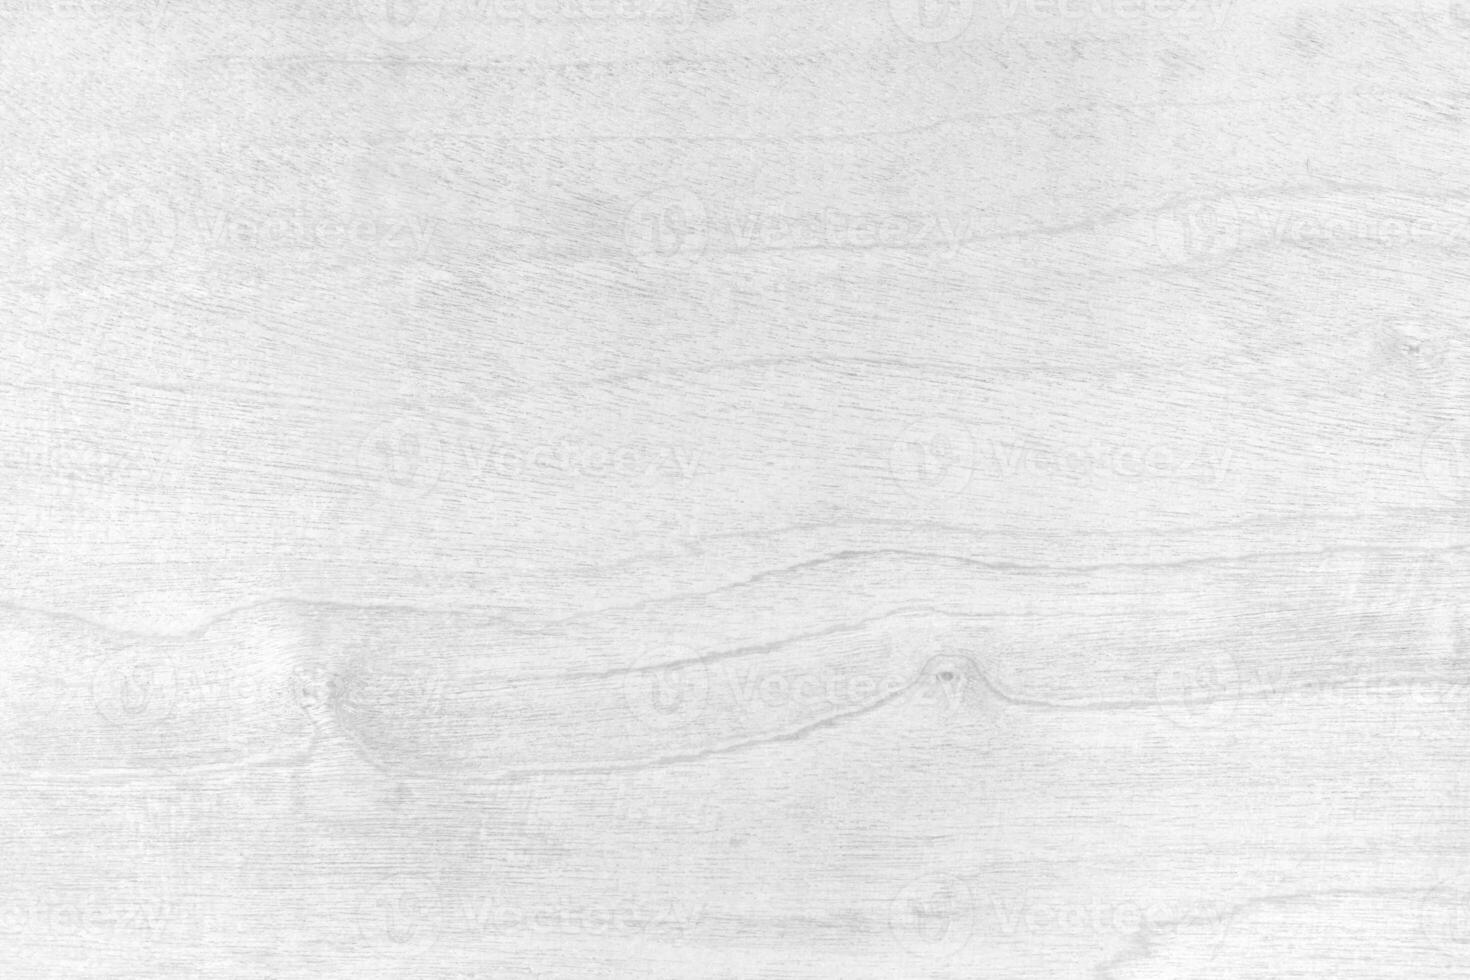 Wood that has mold on the surface light white color for texture and background photo